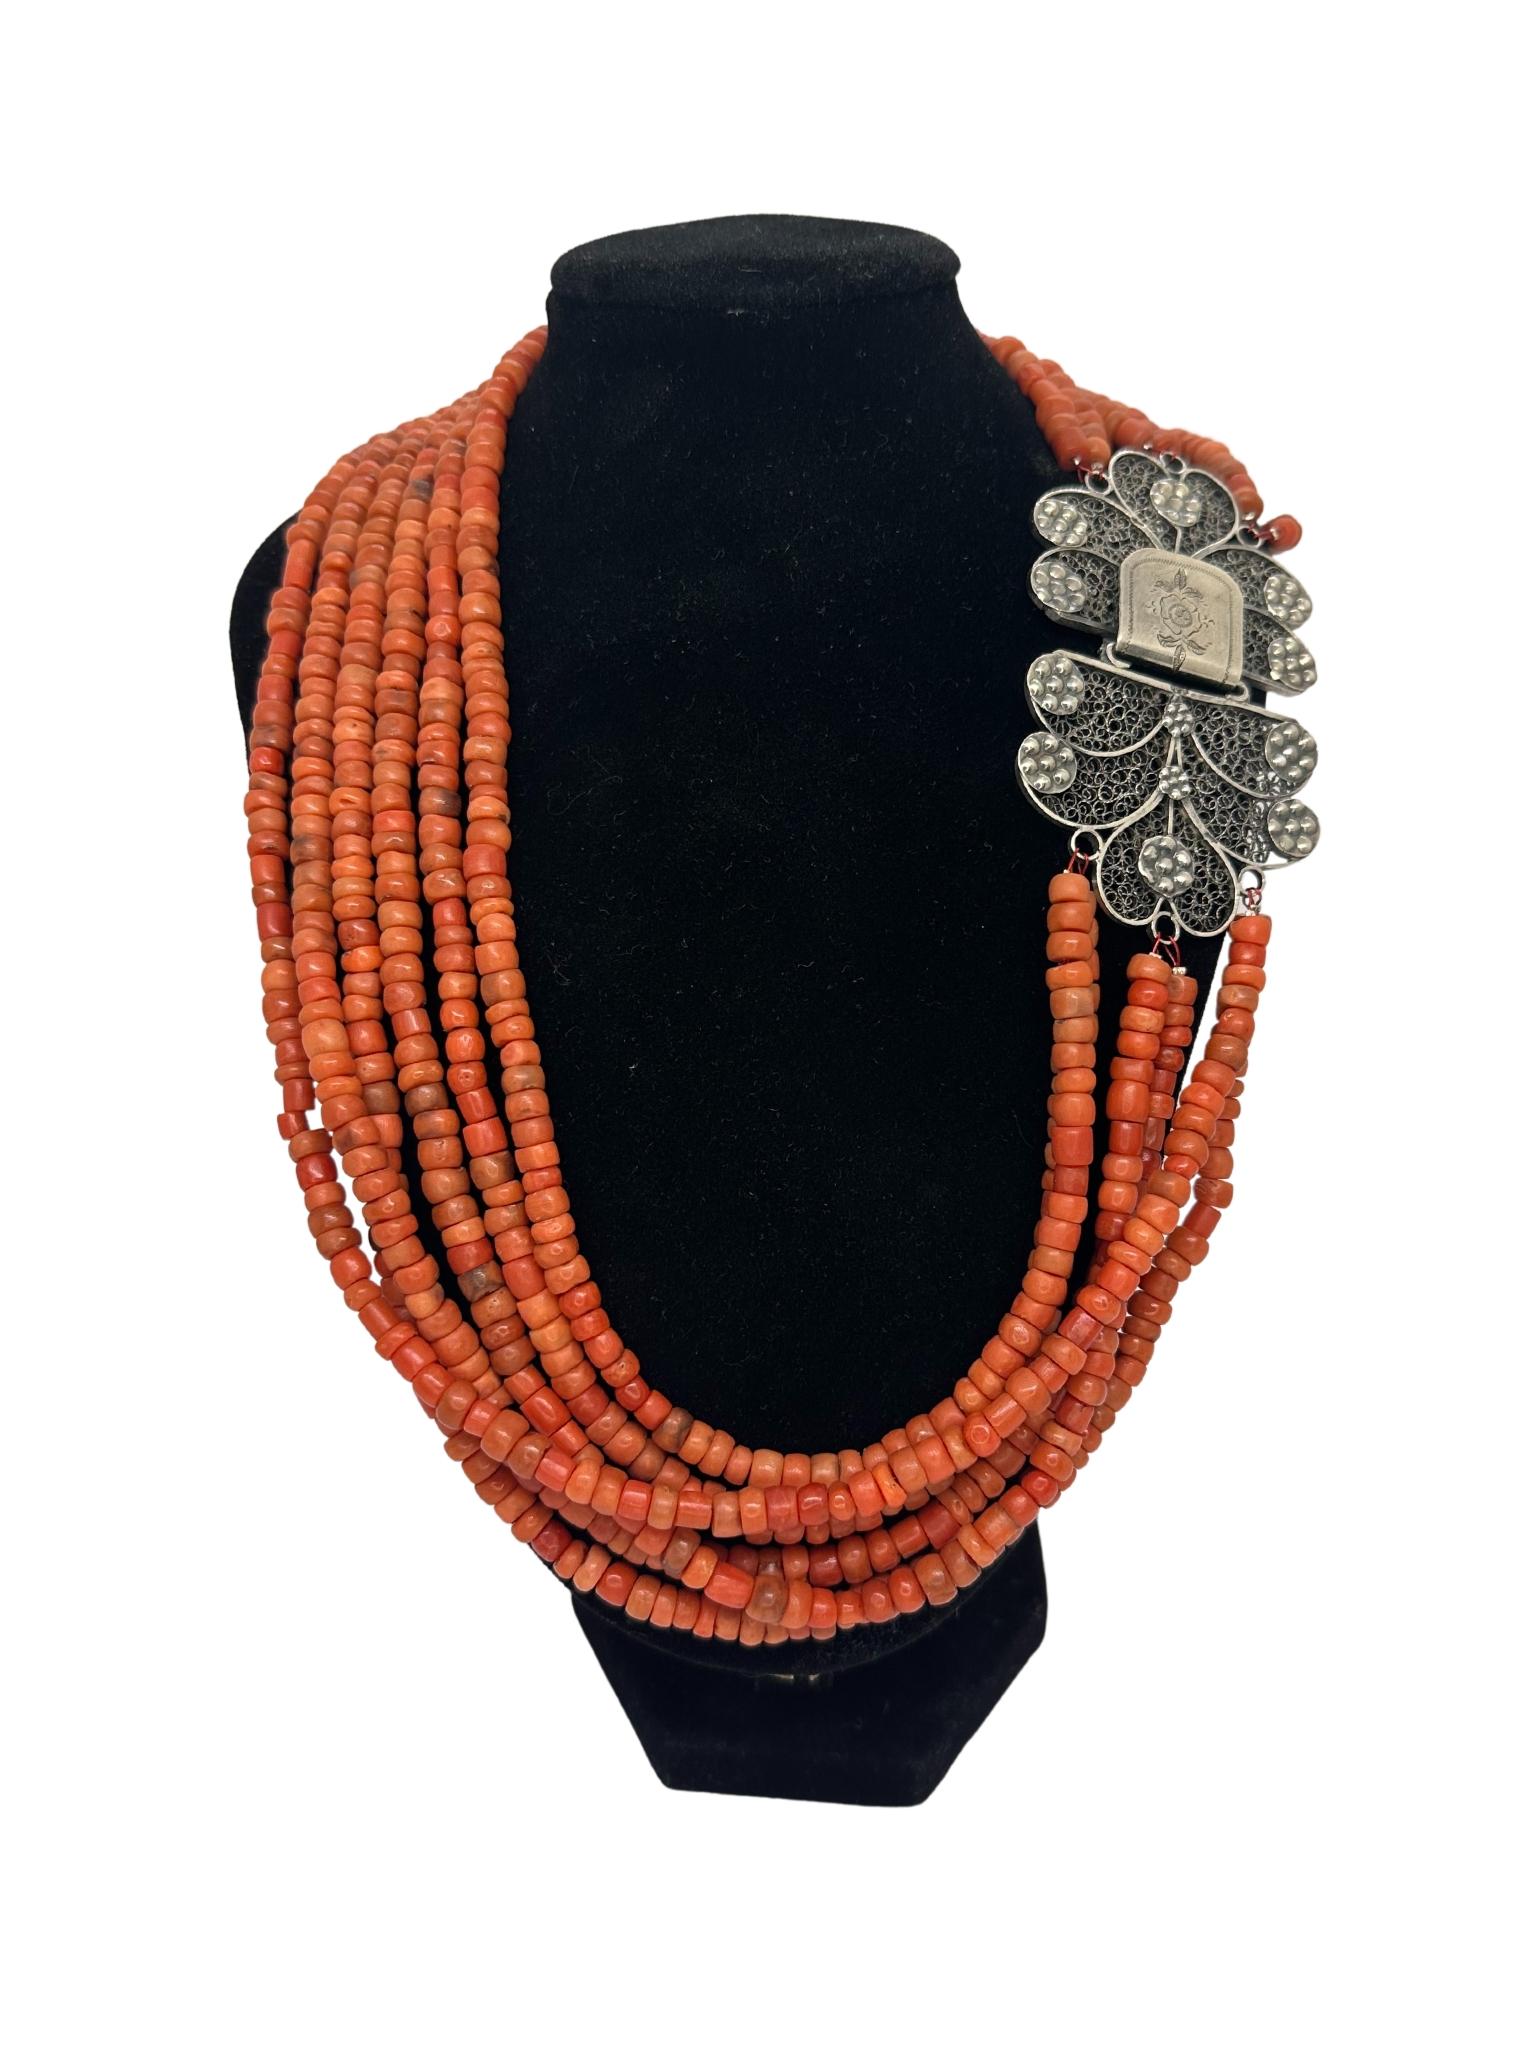 Exclusive and very refined Italian red coral necklace with 835 silver clasp closure decorated with filigree. The necklace is made up of small natural undyed red coral beads that are arranged in six strands. The closure is a “hook”, hidden in the